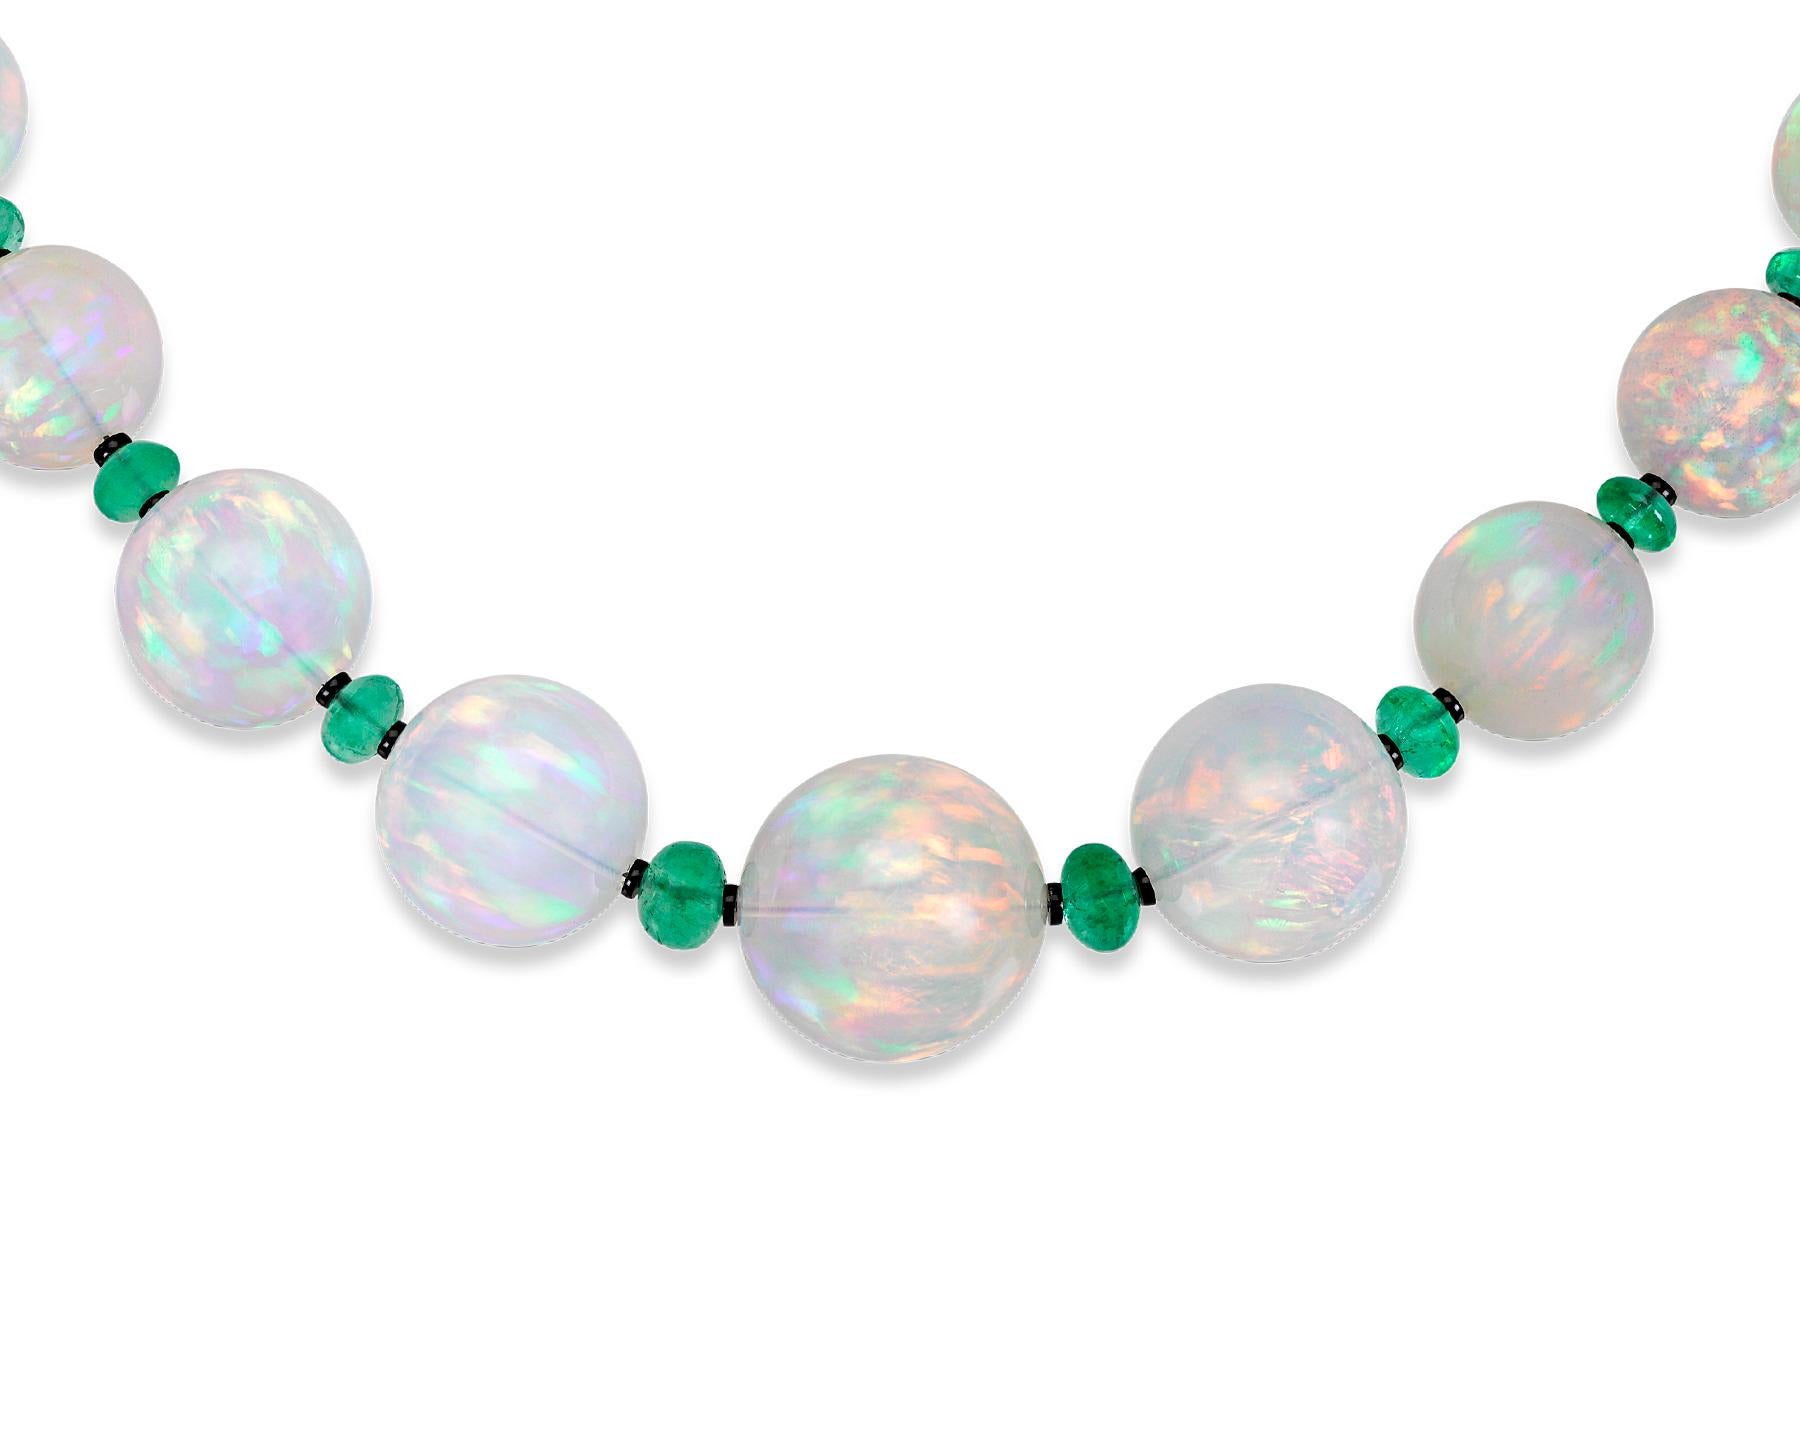 Thirty-three monumental Ethiopian opal beads totaling approximately 584.00 carats comprise this mesmerizing necklace. The graduated gems are not only impressive in size, but each exhibits a high level of translucence and extraordinary play of color.